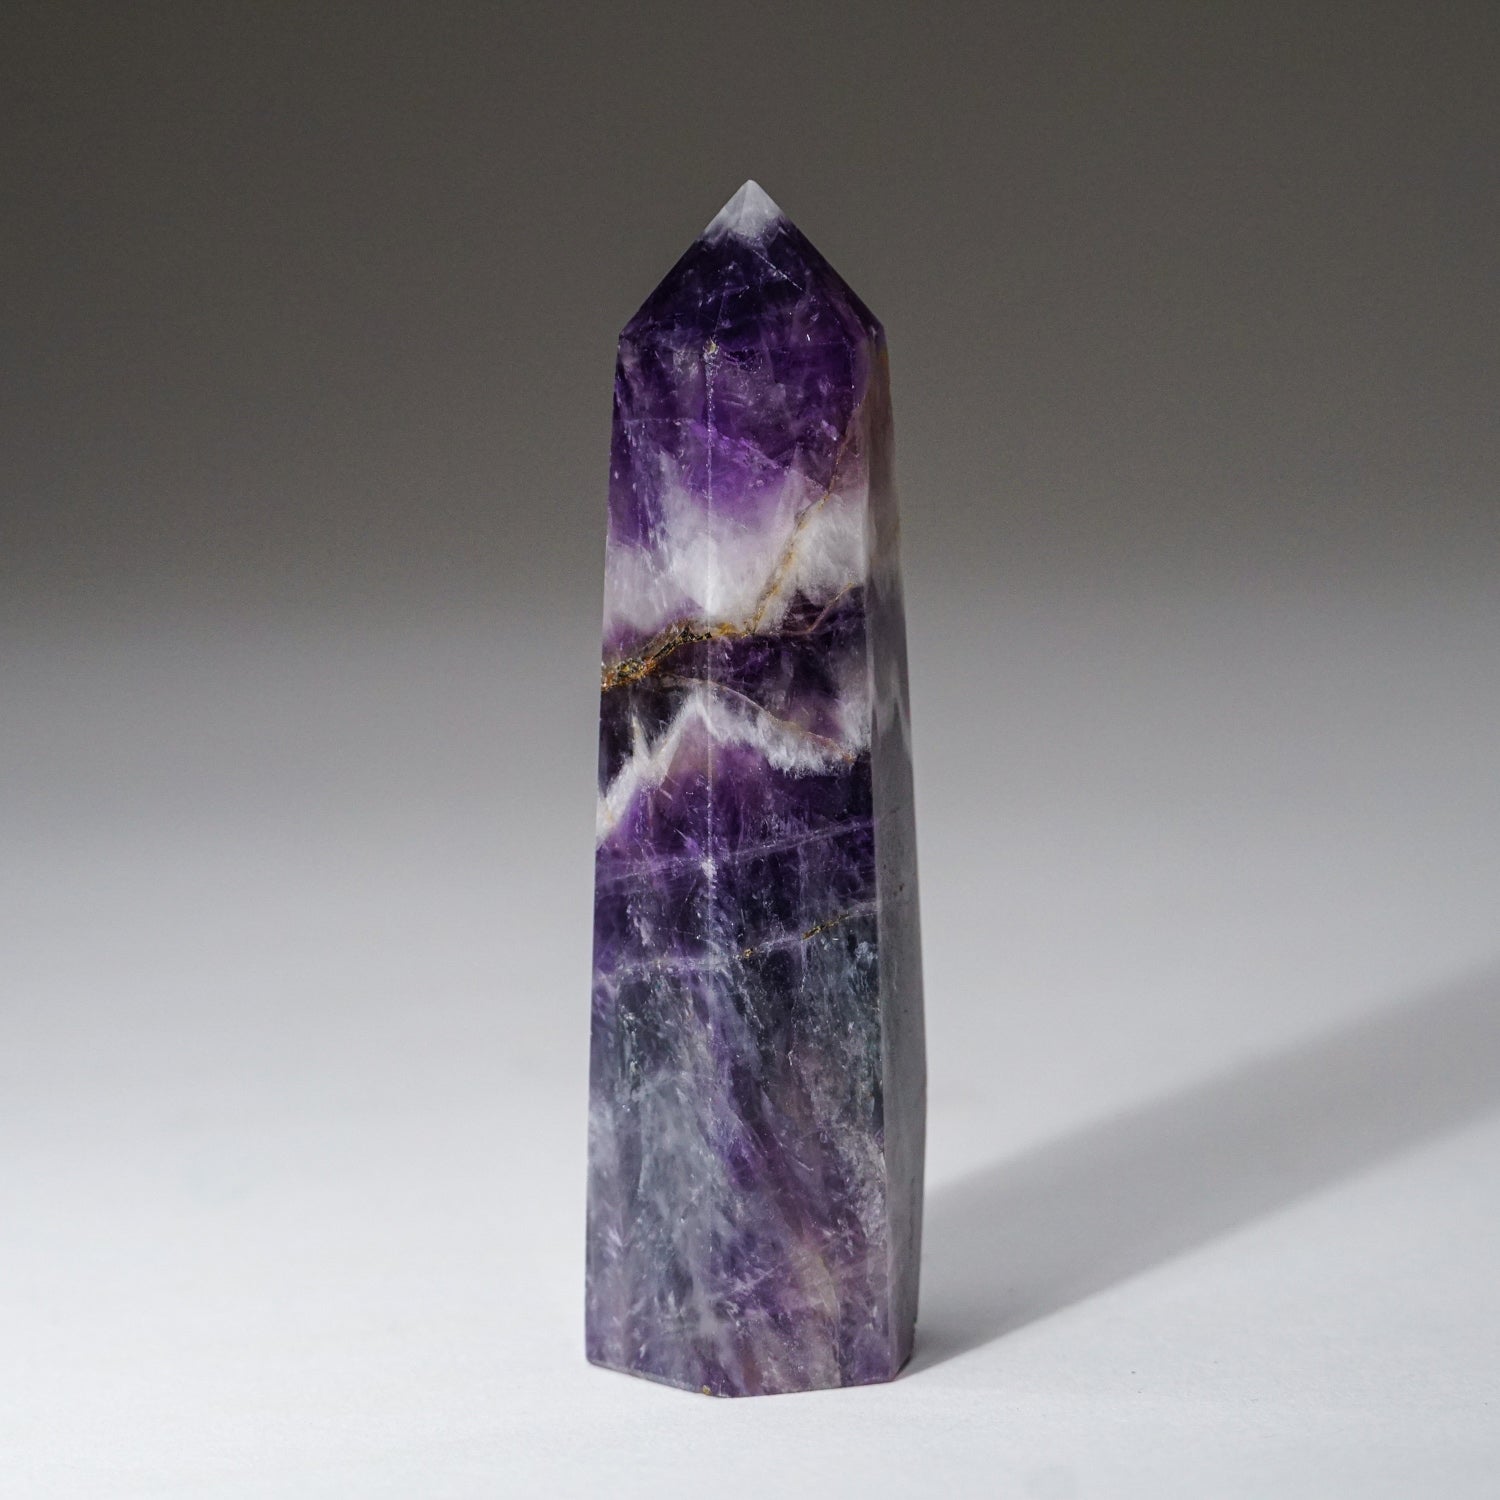 Polished Chevron Amethyst Point from Brazil (92.5 grams)